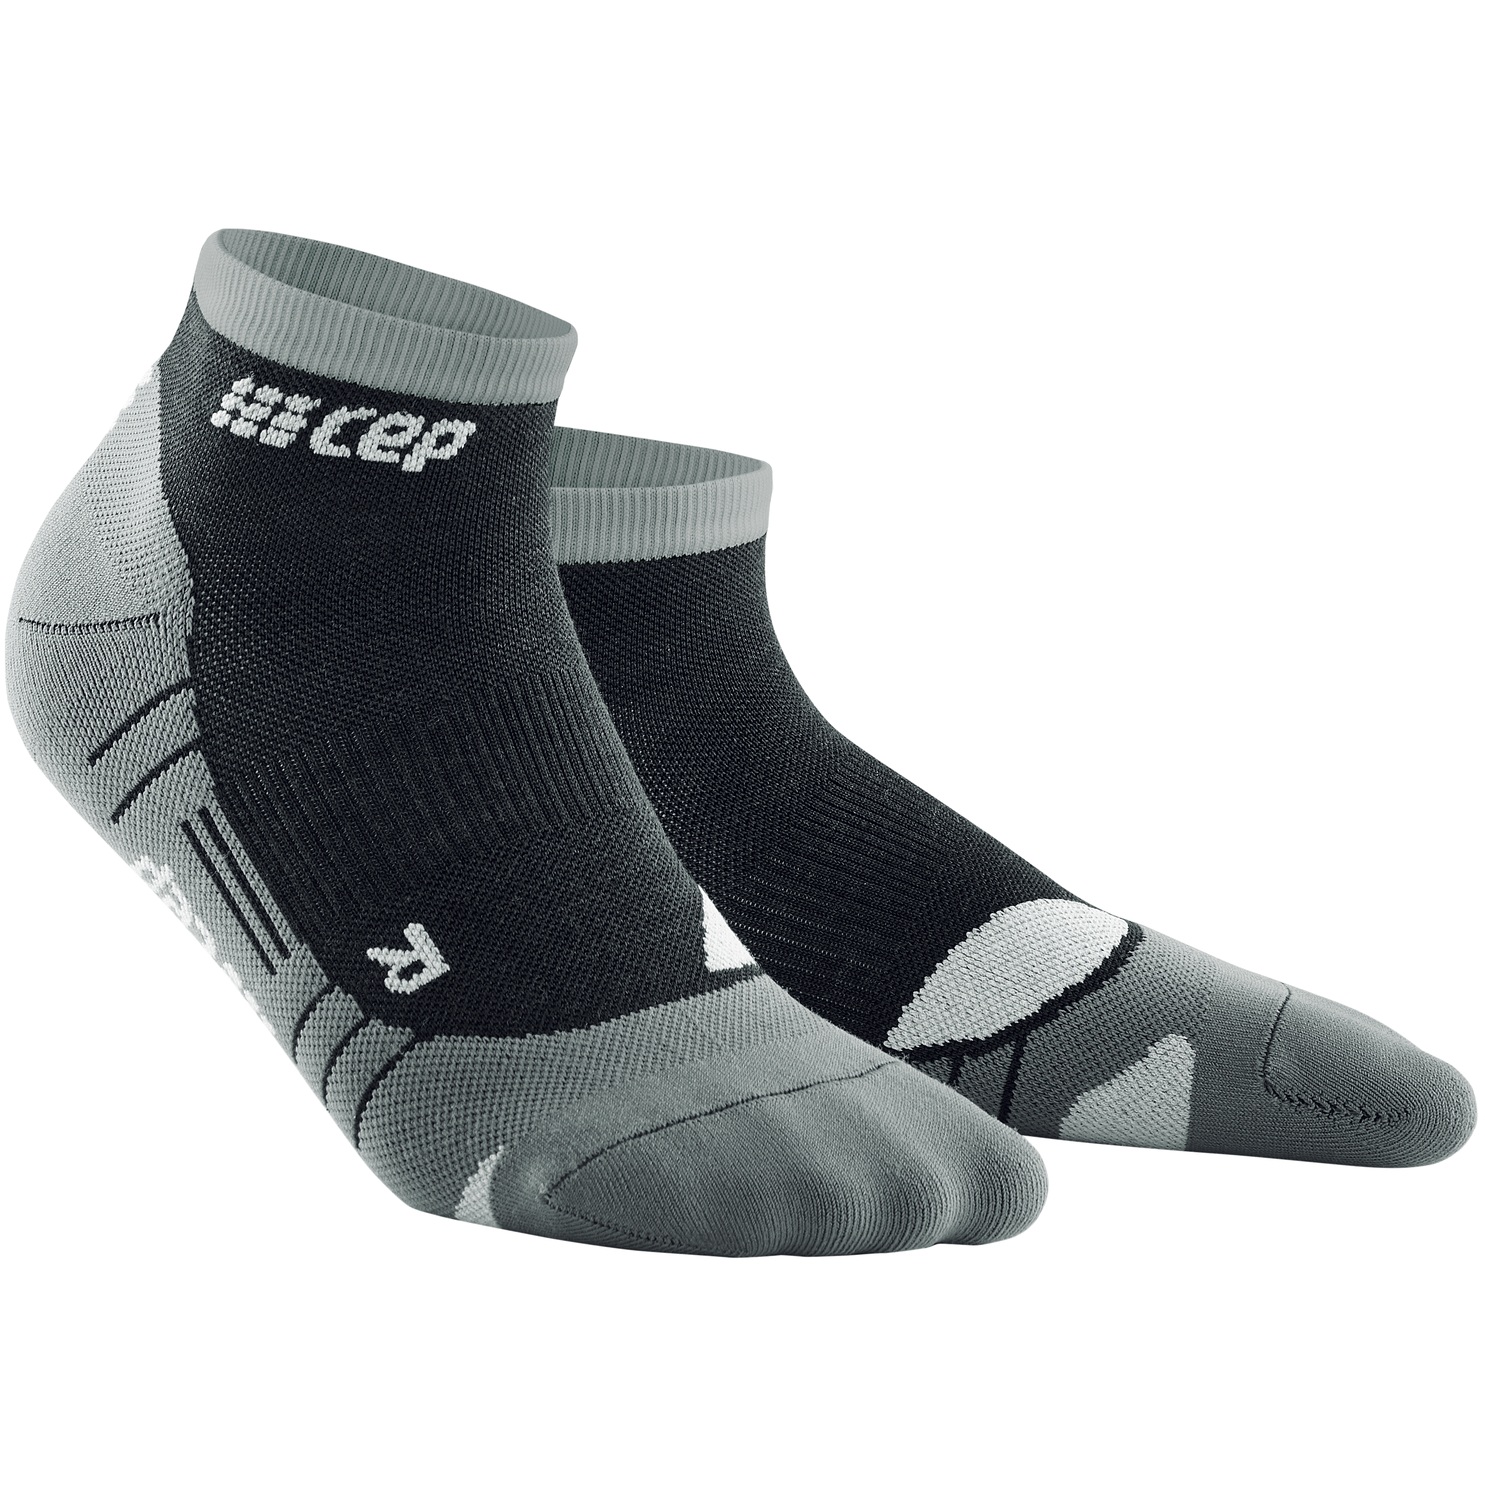 Picture of CEP Hiking Light Merino Low Cut Compression Socks - stonegrey/grey